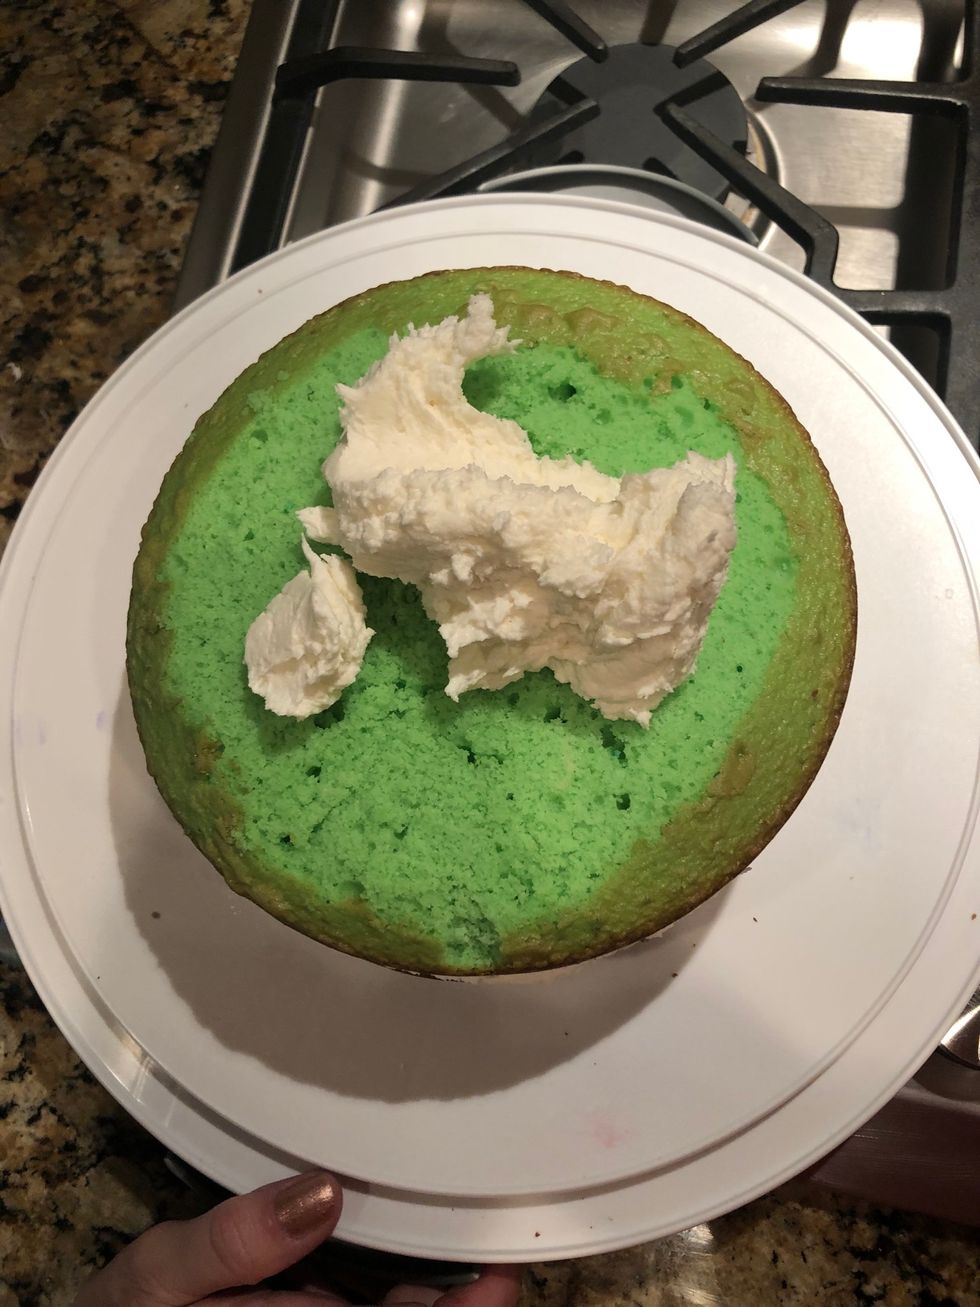 Put icing on the green layer until fully covered.